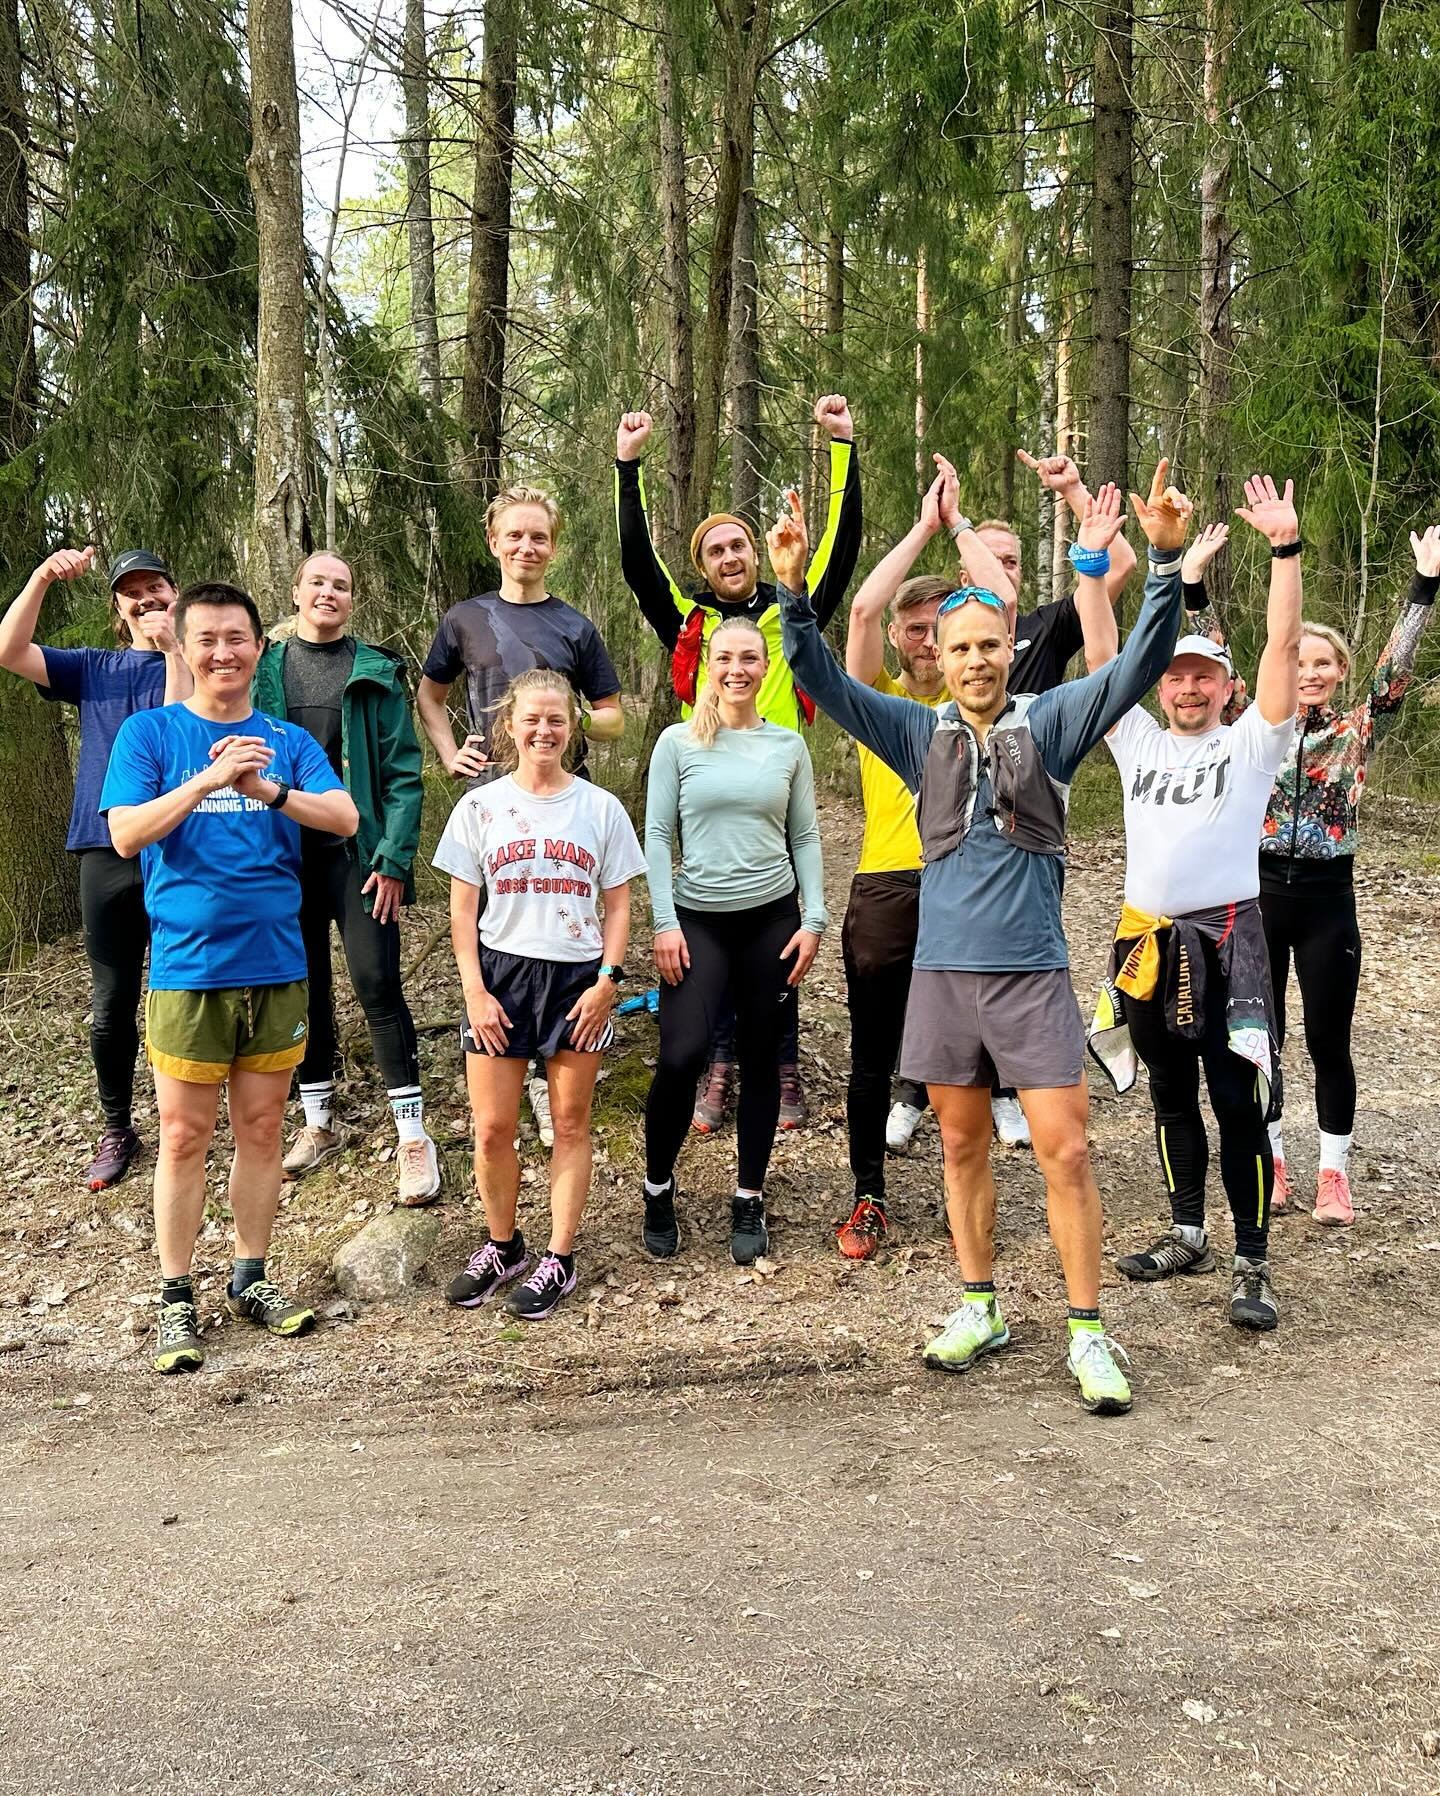 A suberb trail running practice with @supercell runners getting ready for @bodomtrail ✨ 

If you are interested in running together with your colleagues, drop me an email and I&rsquo;ll make sure to share my best trail running tips and tricks with yo